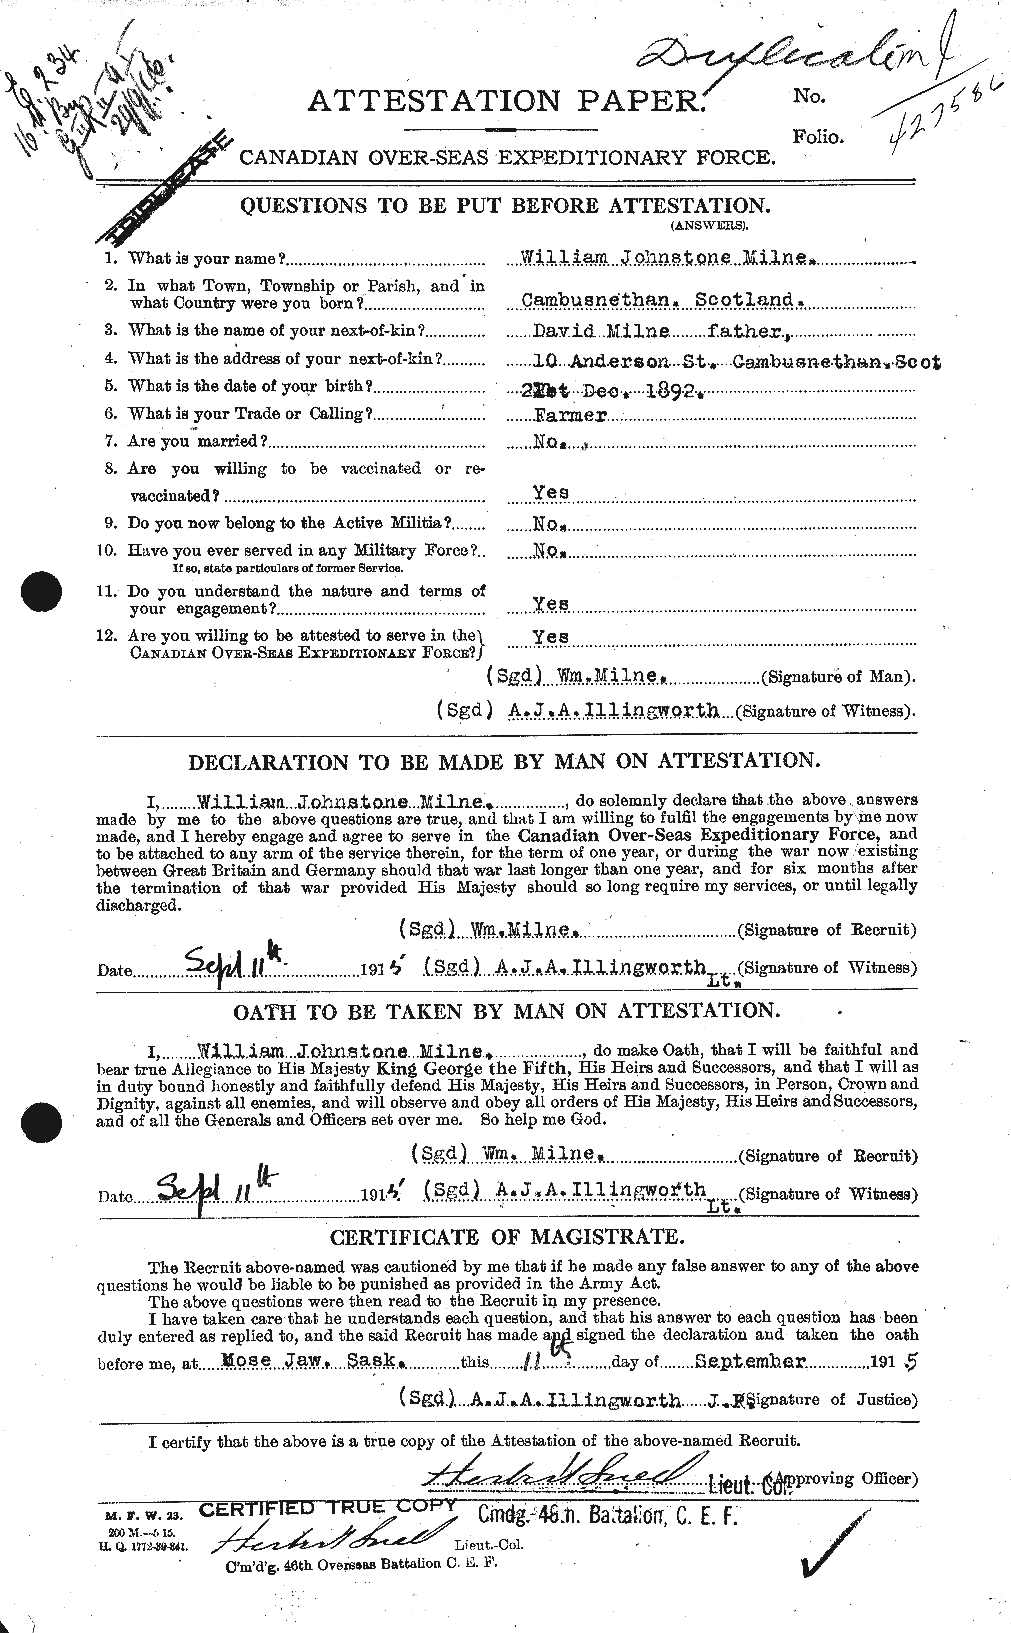 Personnel Records of the First World War - CEF 206286a